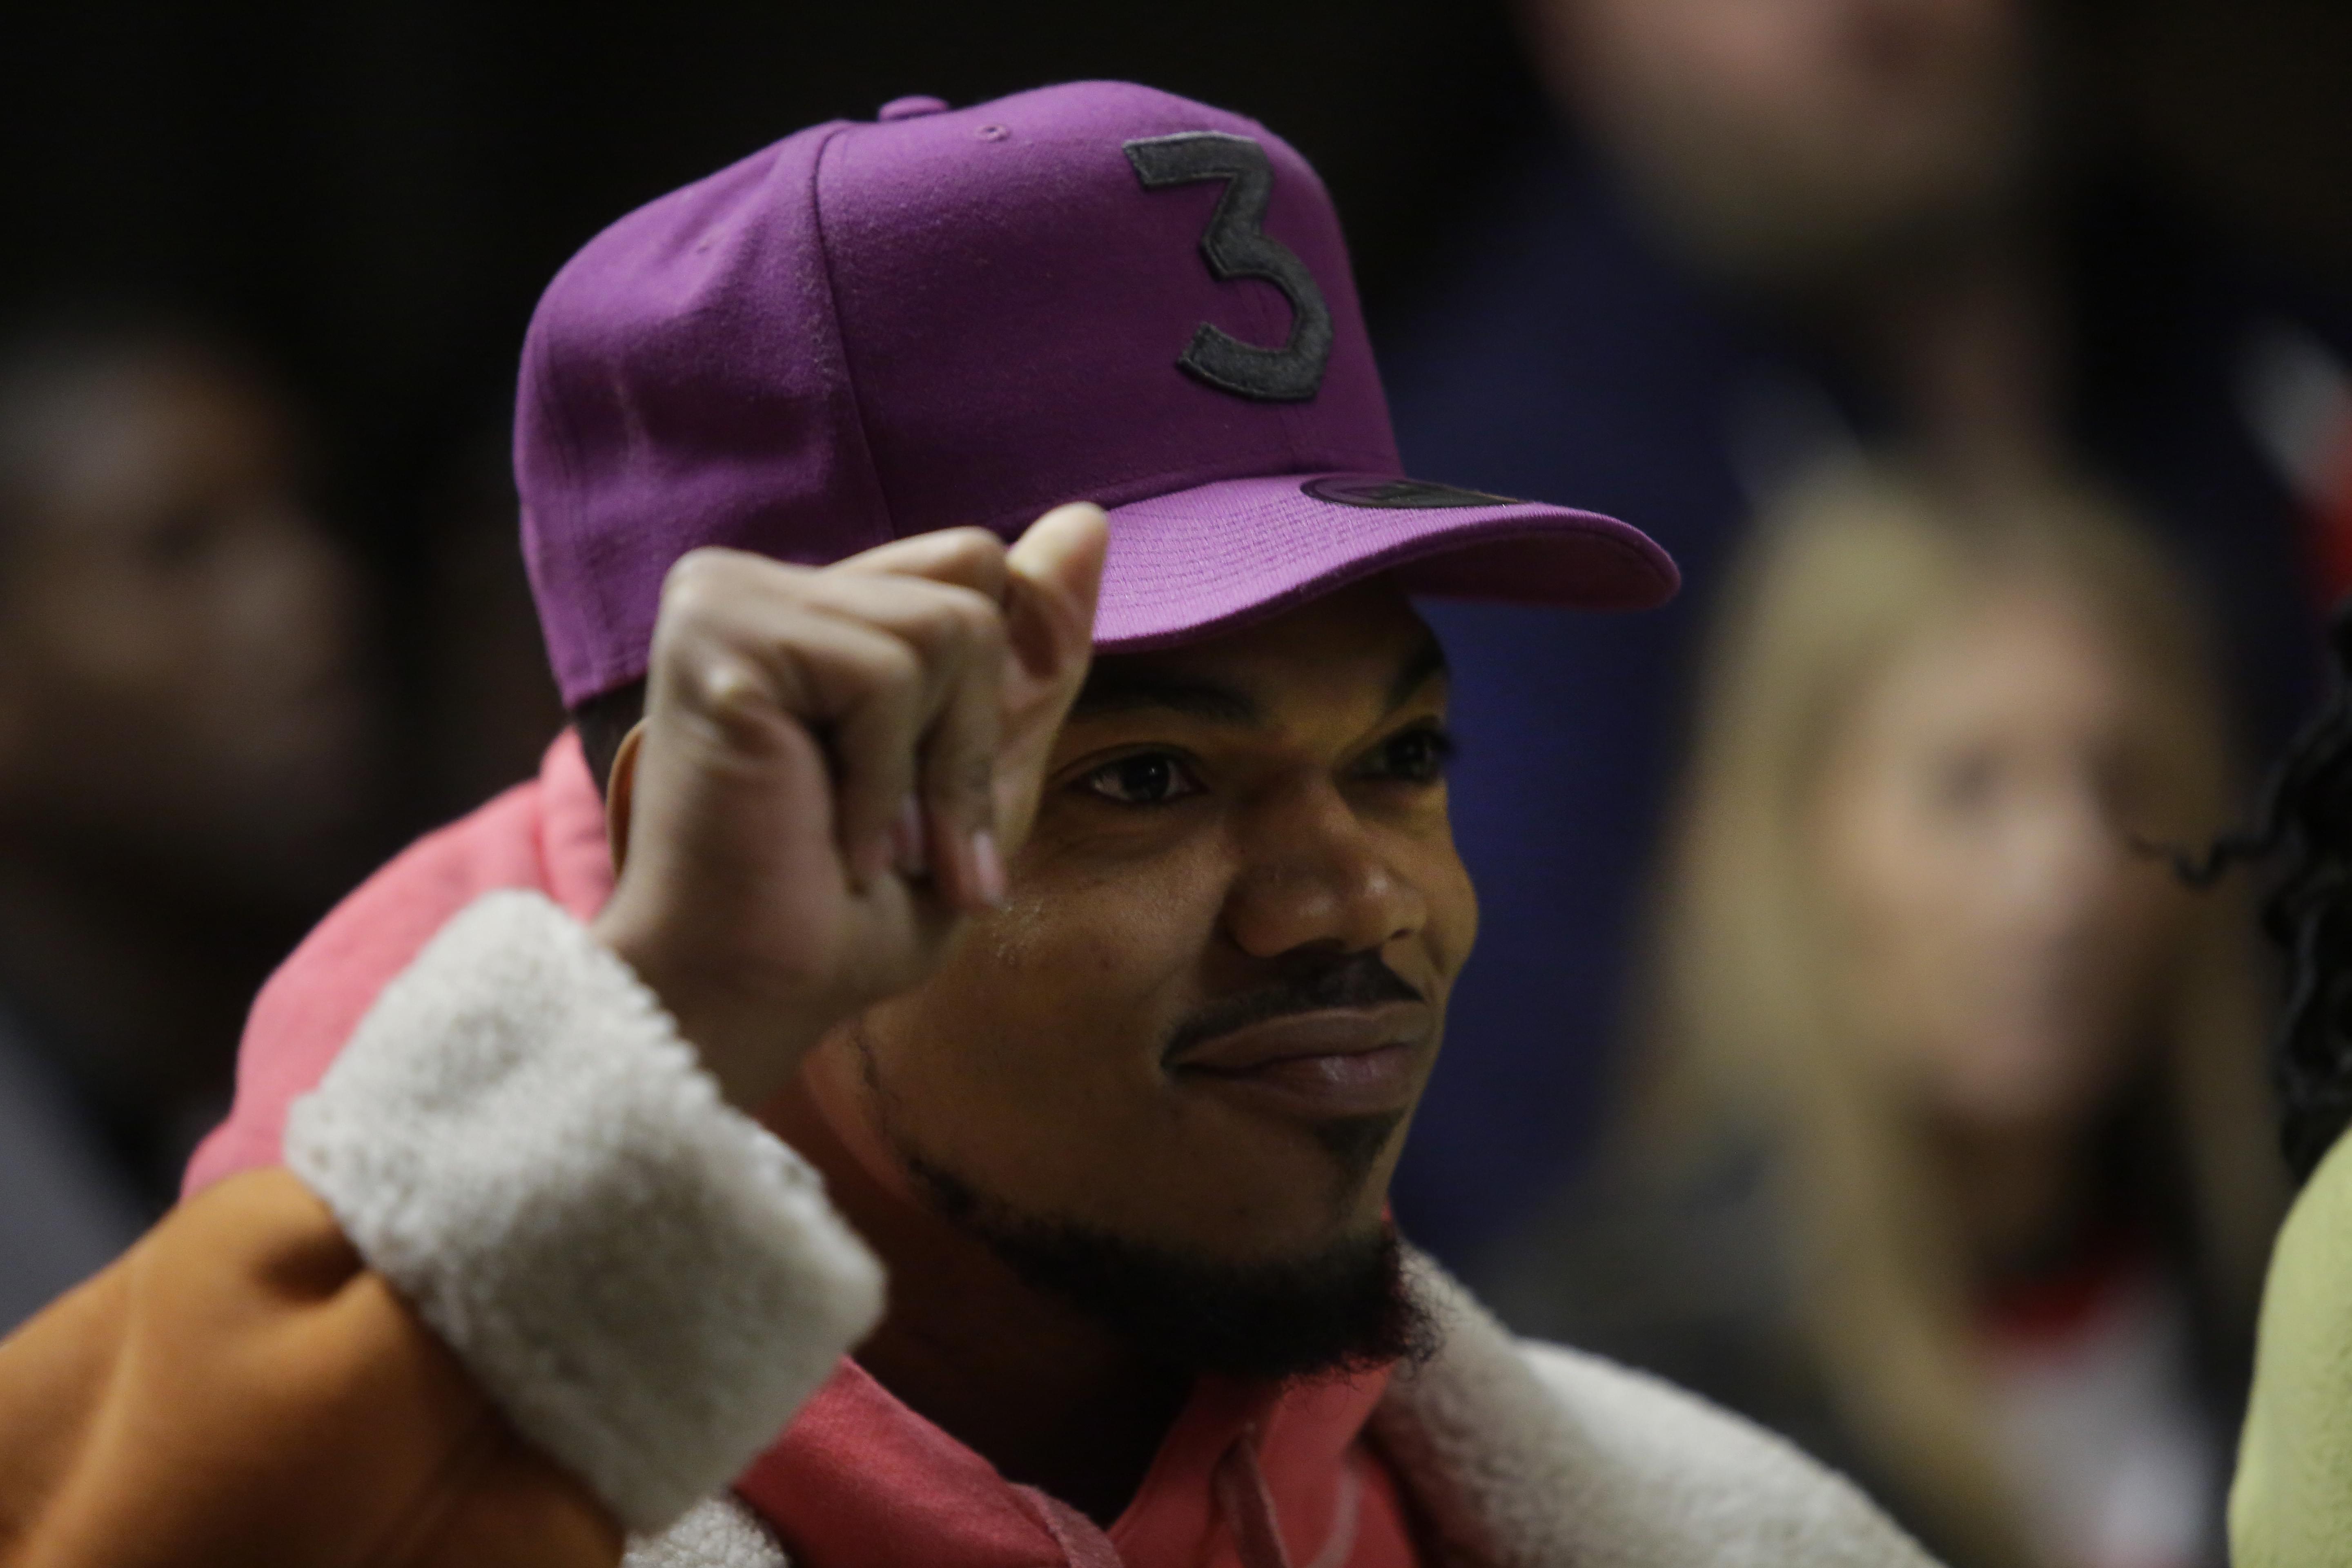 Chance The Rapper Partnering With Postmates To Raise Money For Chicago Youth